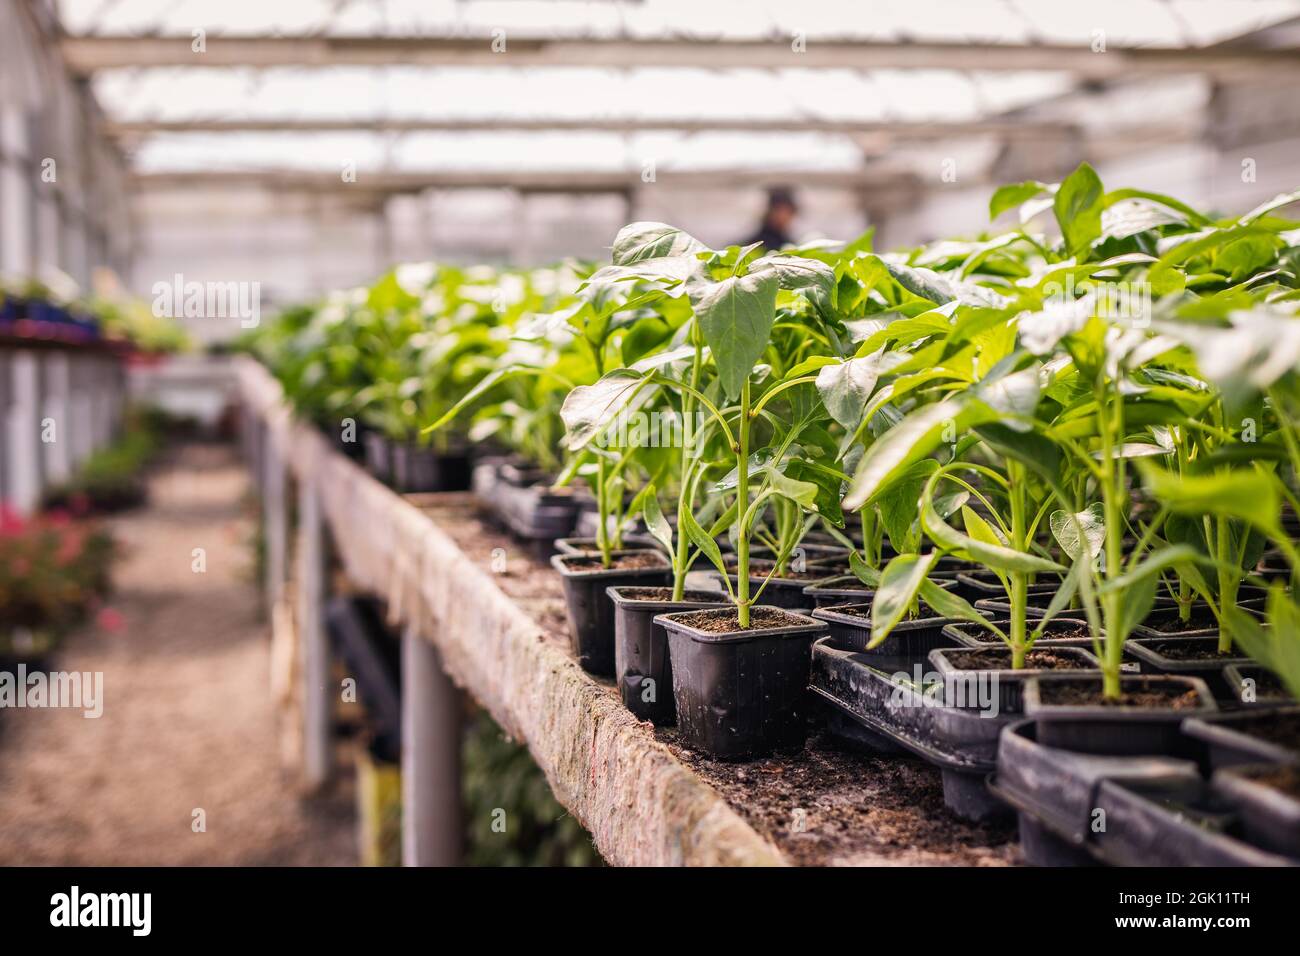 Seedling in greenhouse. Peppers plant in flower pots. Plant nursery Stock Photo